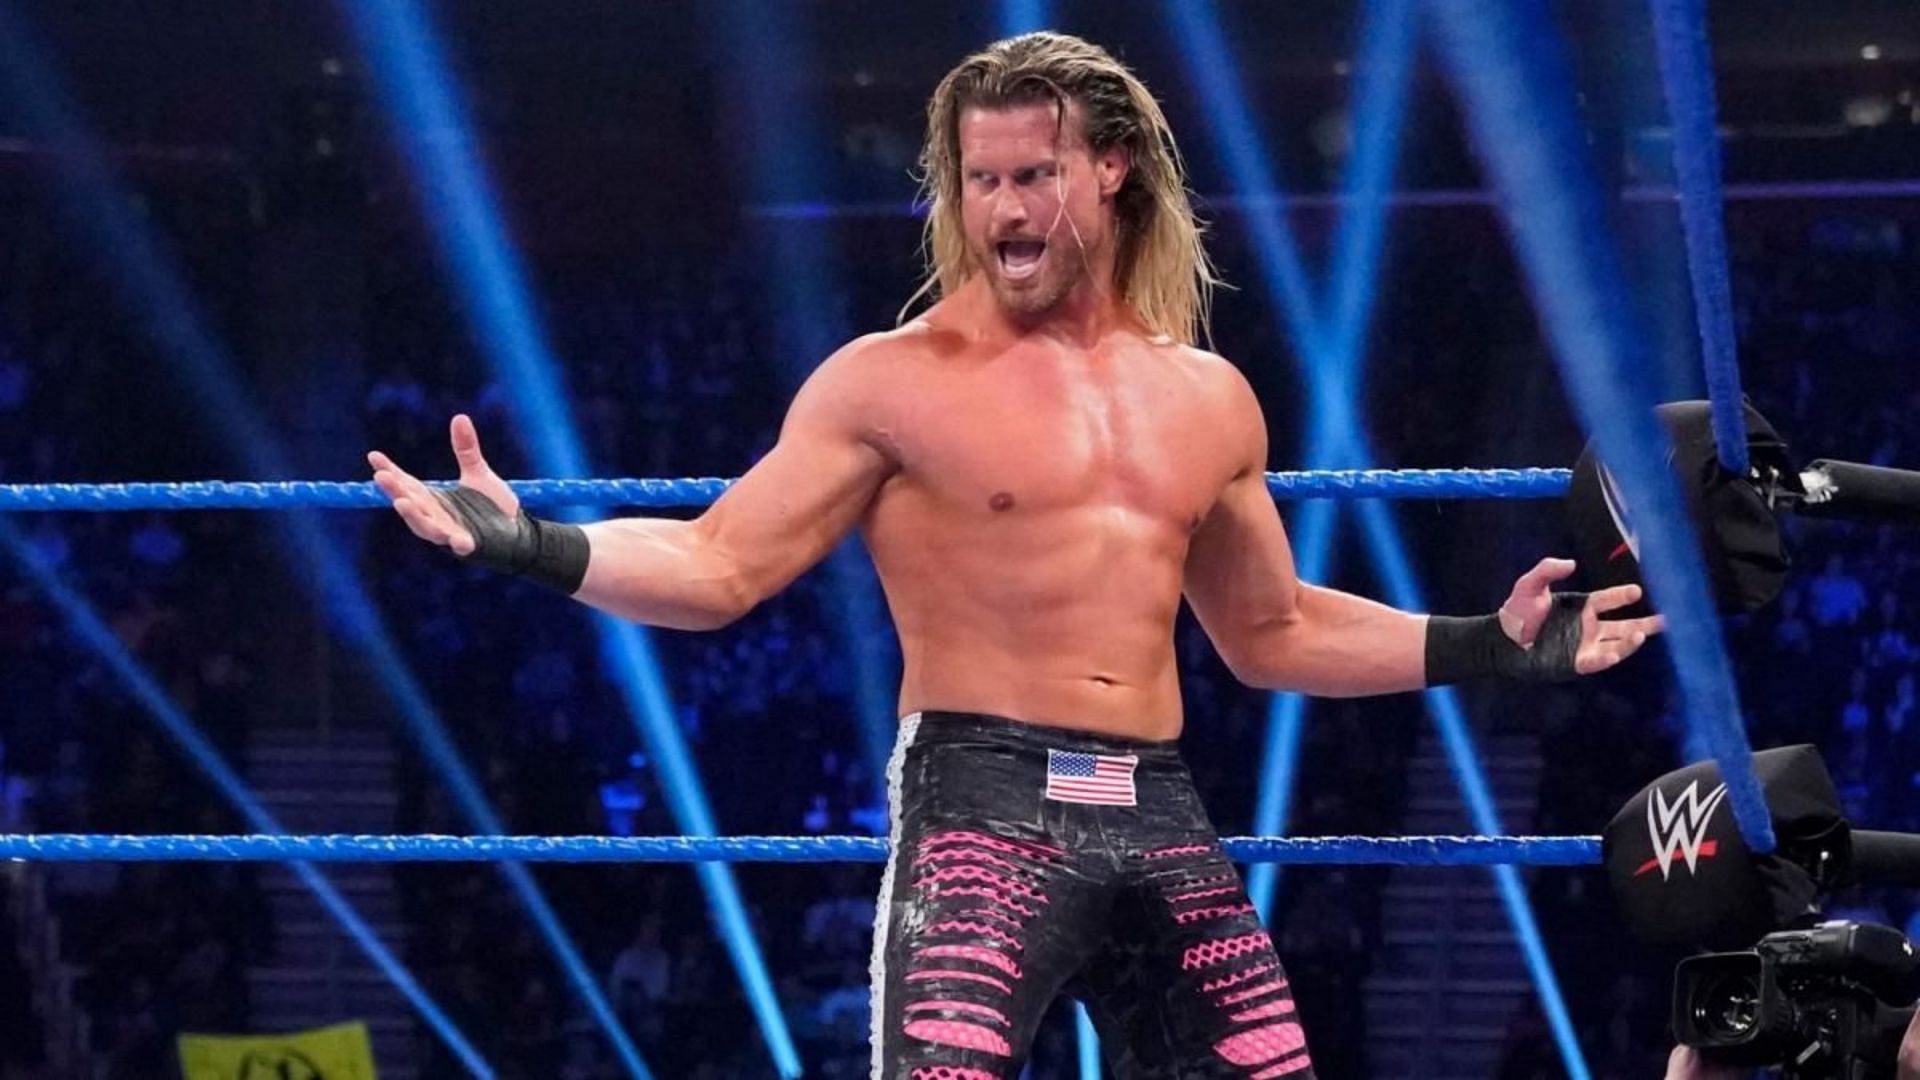 Dolph Ziggler is a two-time world champion